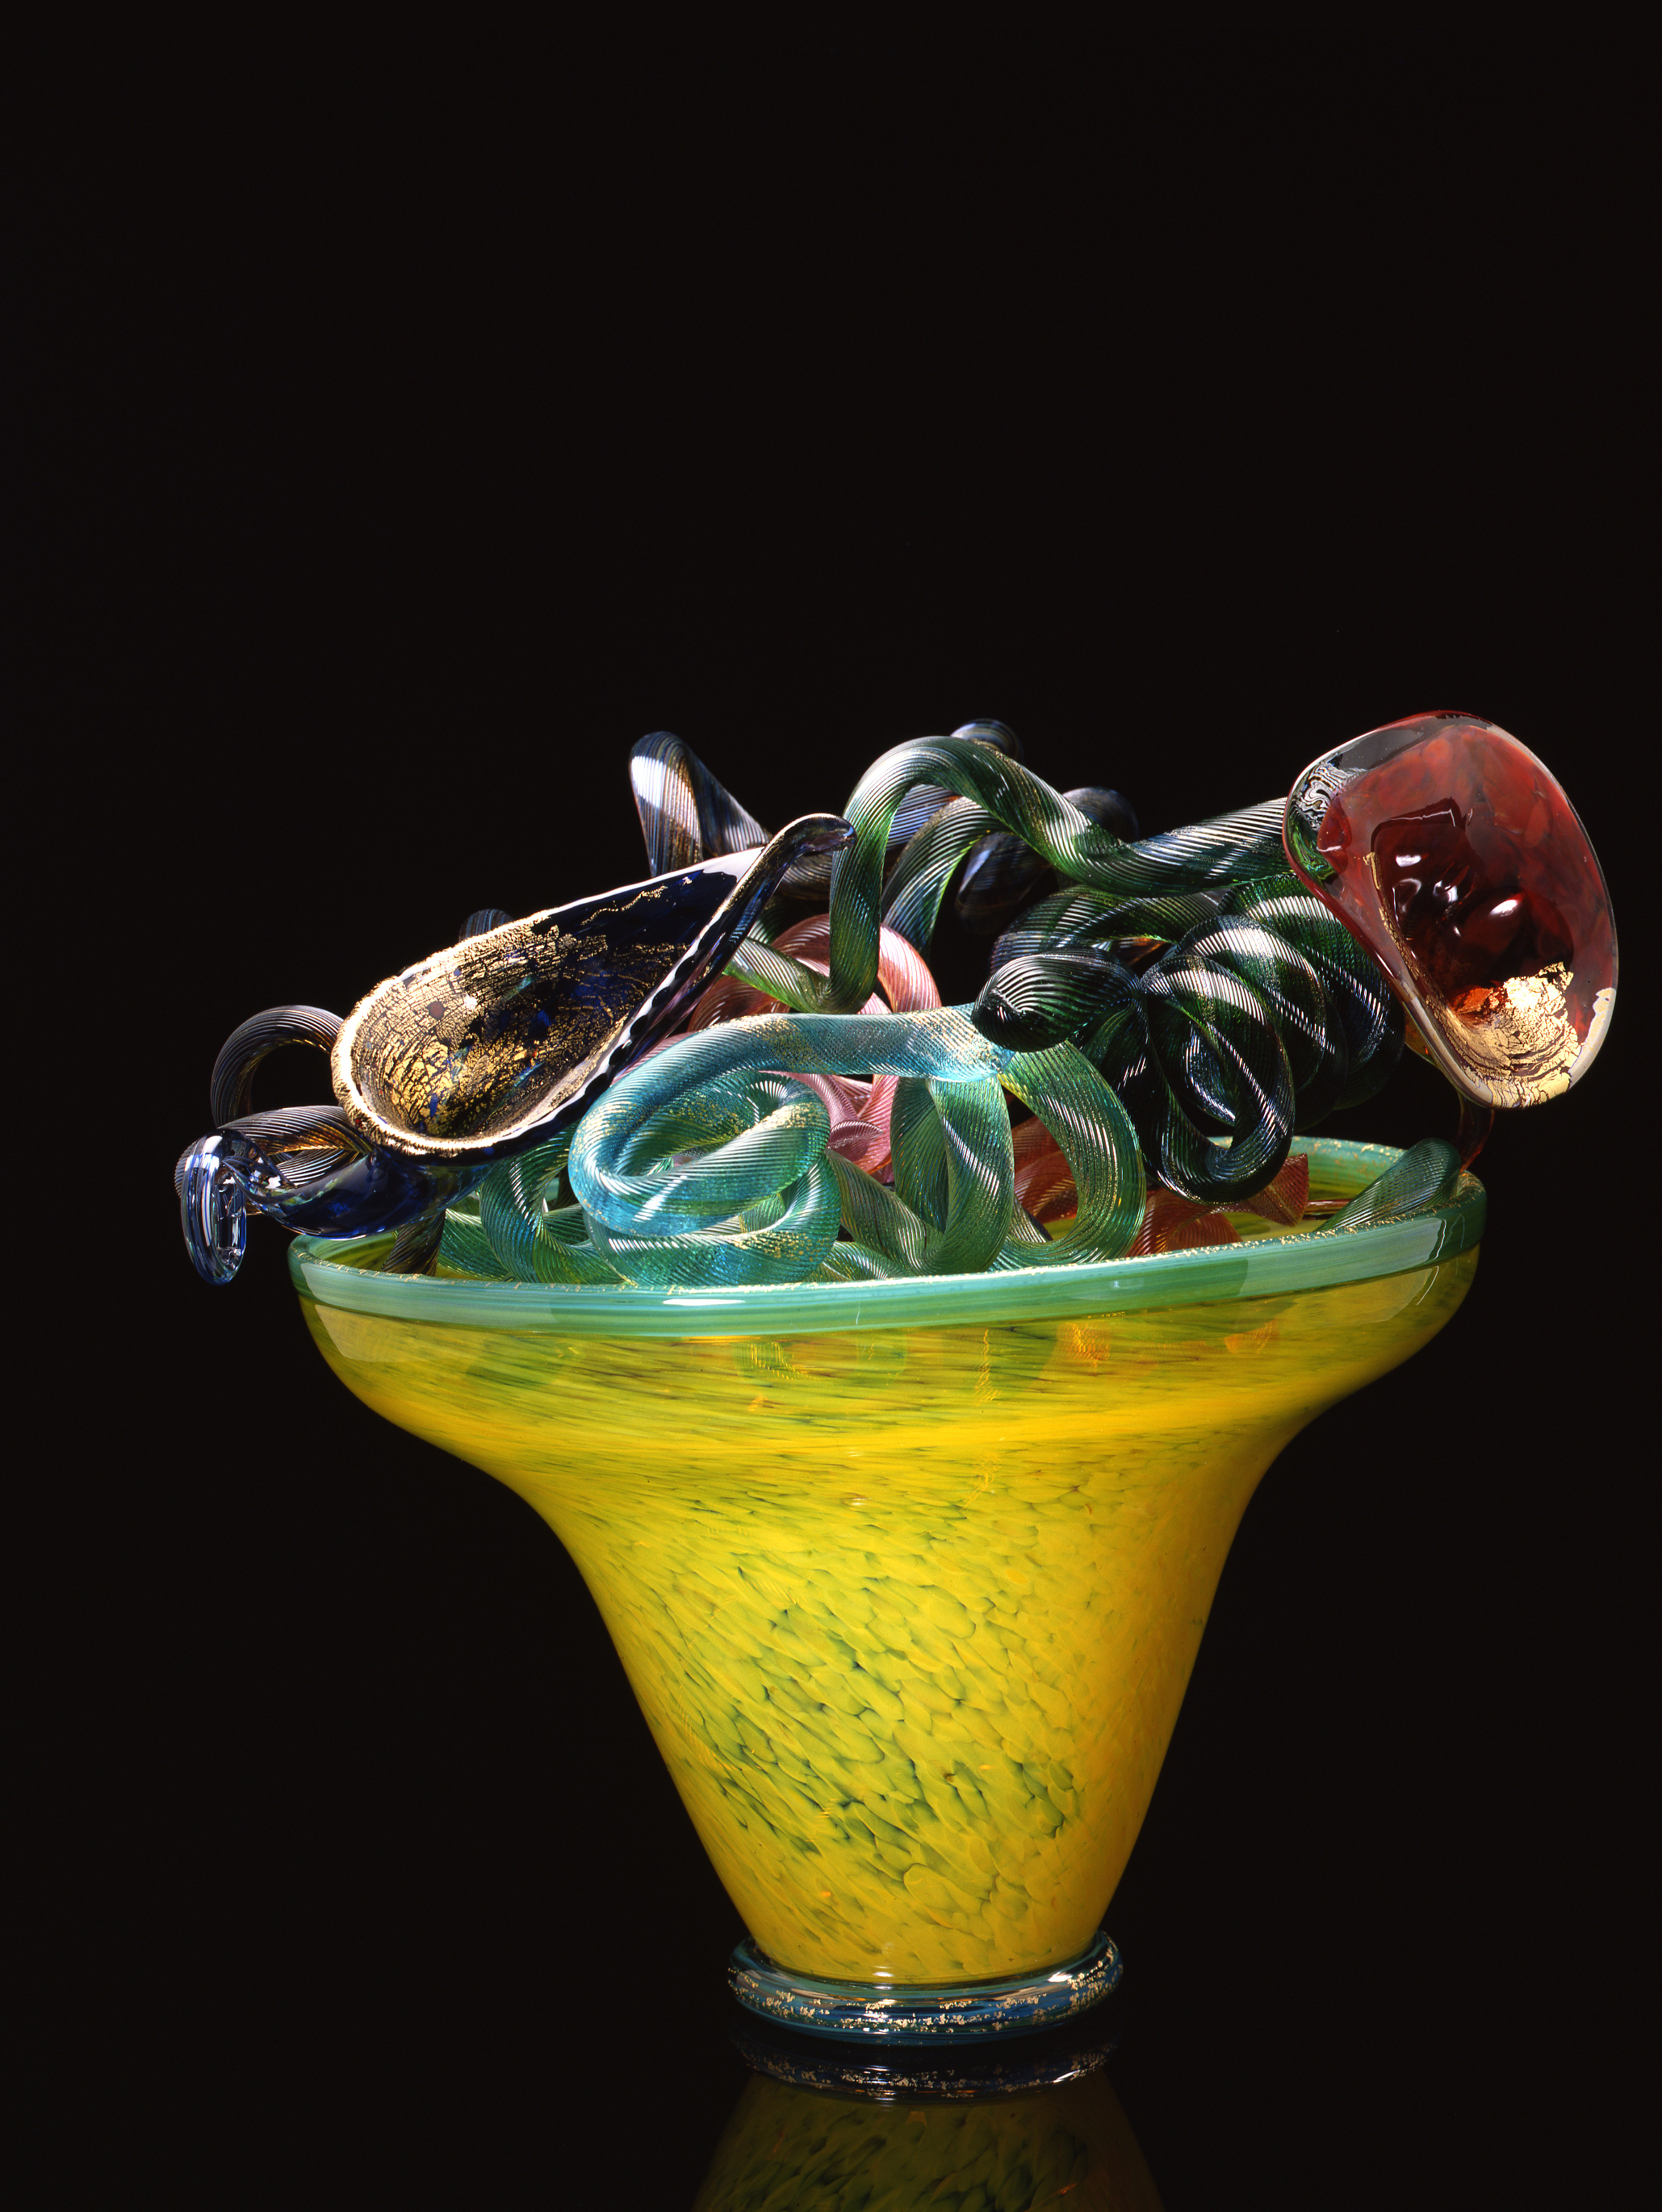  Dale Chihuly,&nbsp; Cadmium Yellow Light Venetian #340 &nbsp;(1990, glass, 17 x 17 x 18 inches) 